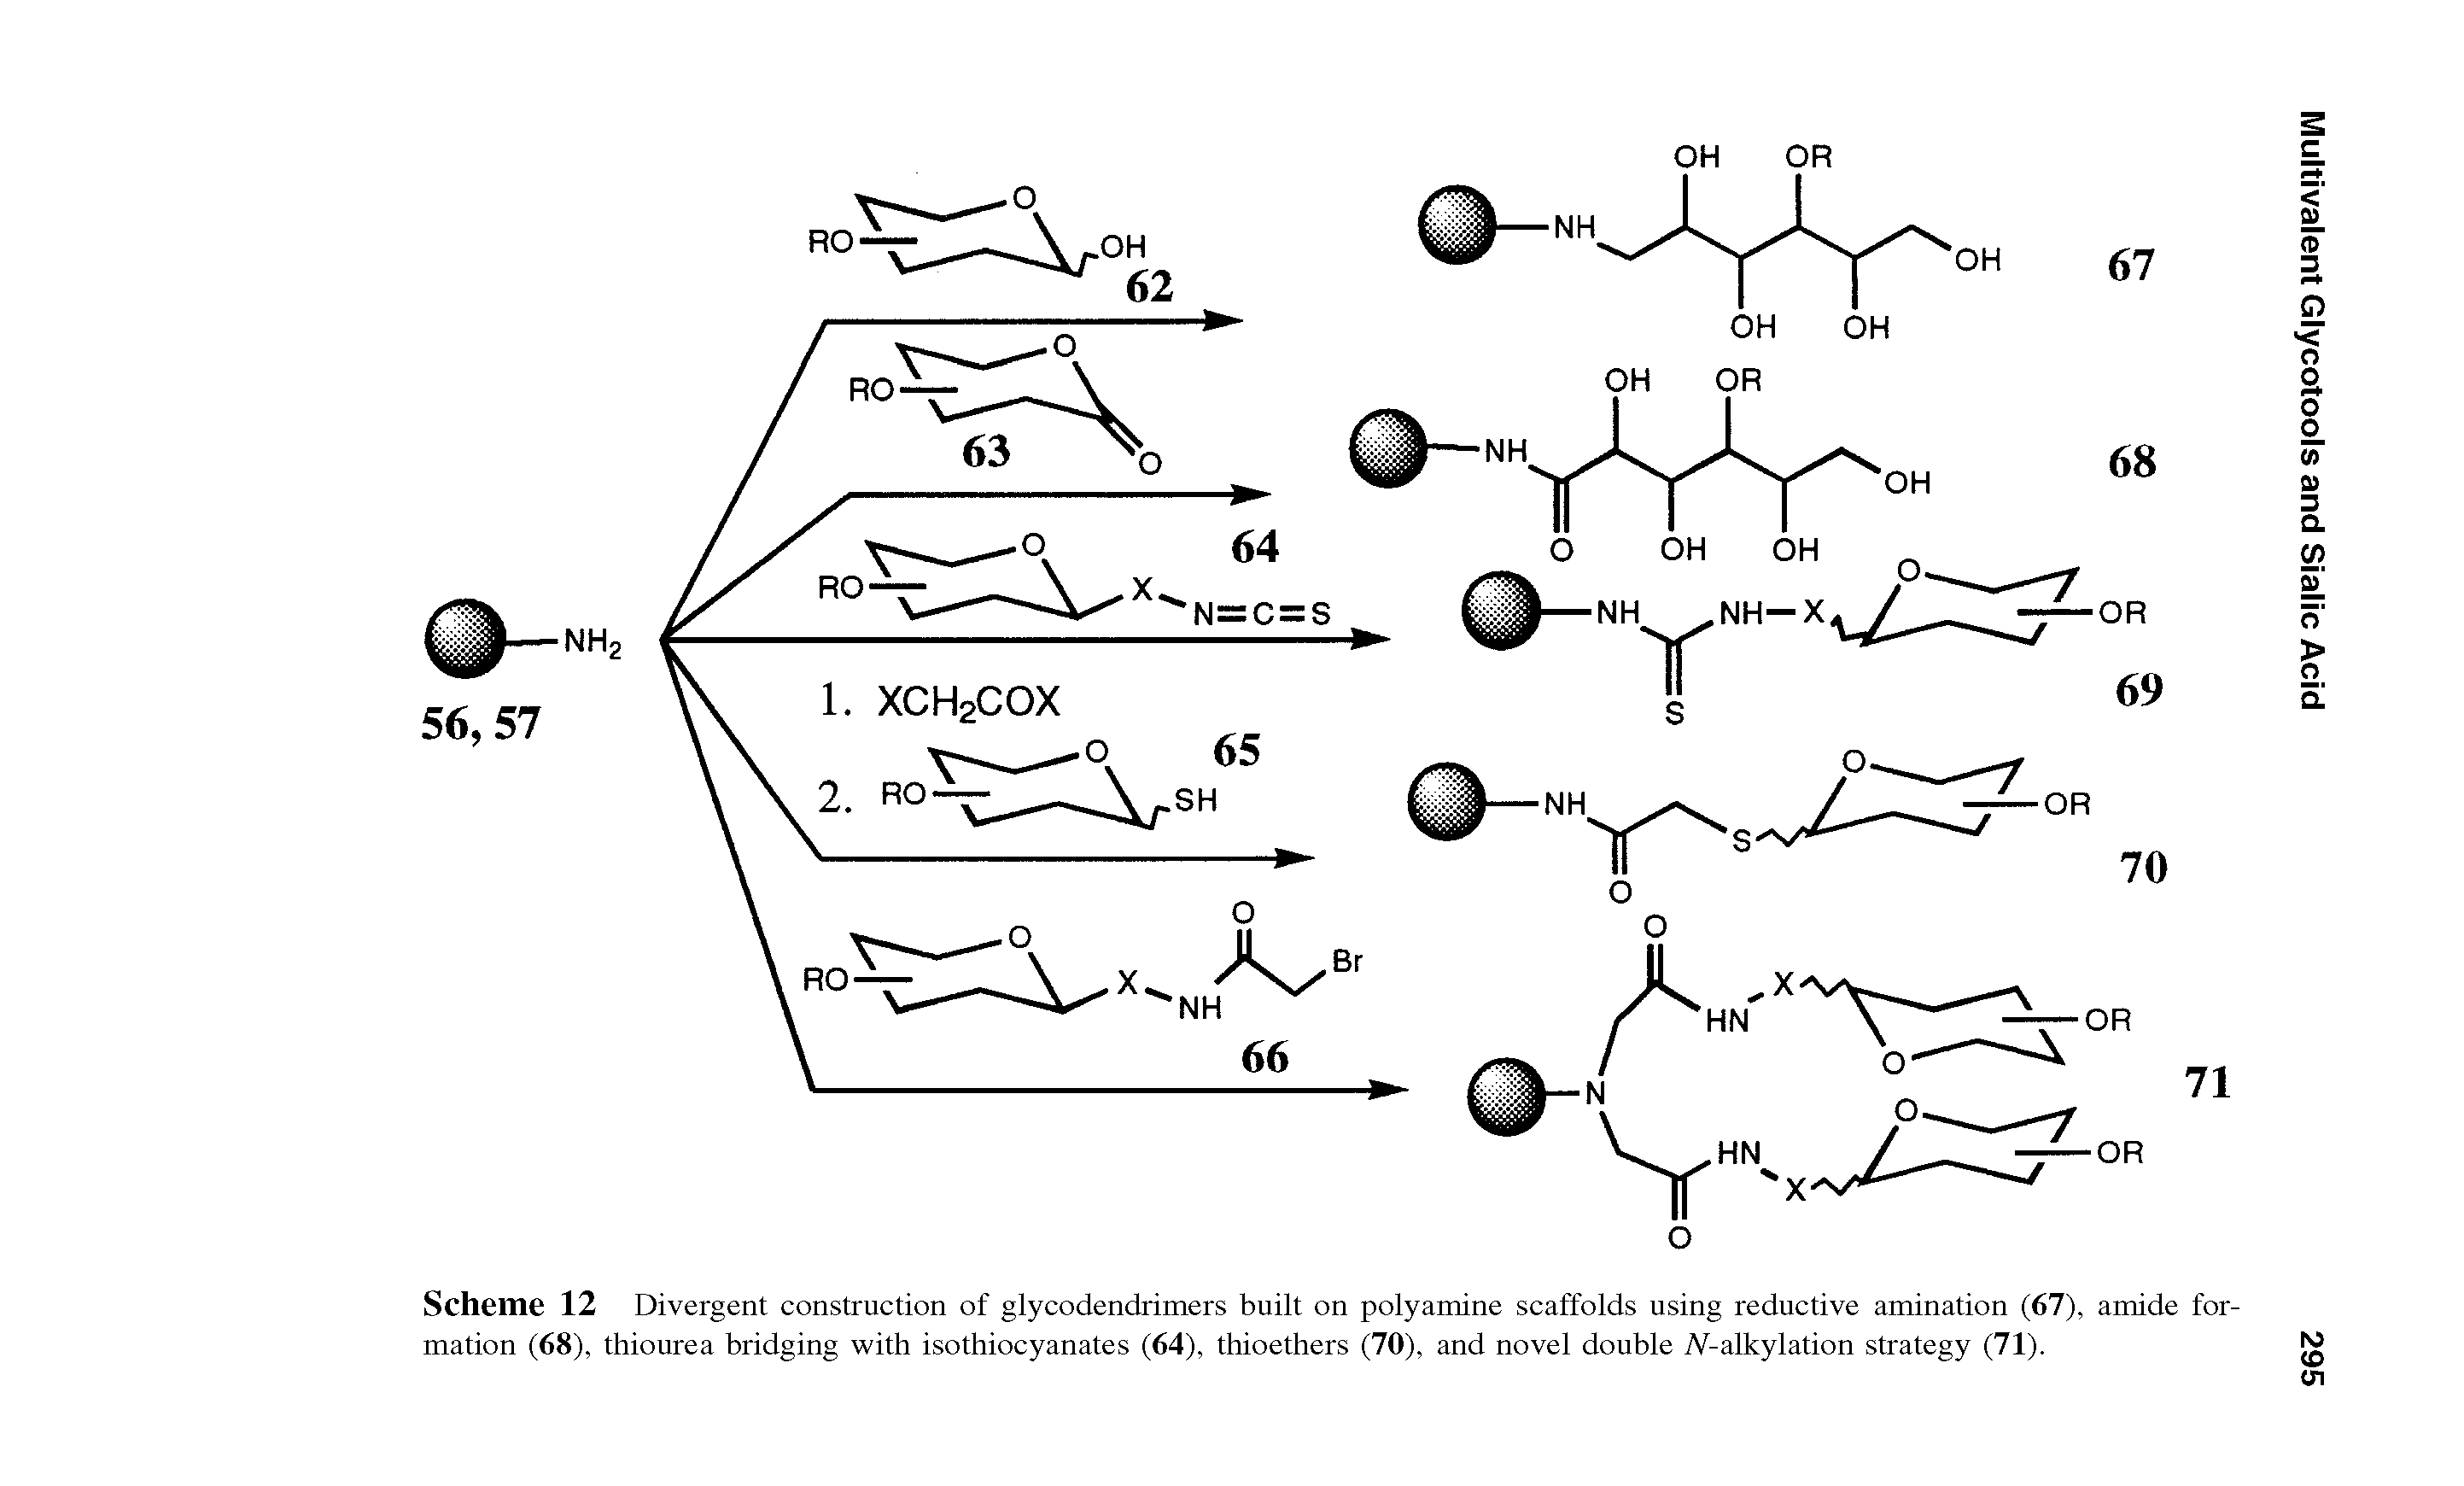 Scheme 12 Divergent construction of glycodendrimers built on polyamine scaffolds using reductive amination (67), amide formation (68), thiourea bridging with isothiocyanates (64), thioethers (70), and novel double A -alkylation strategy (71).